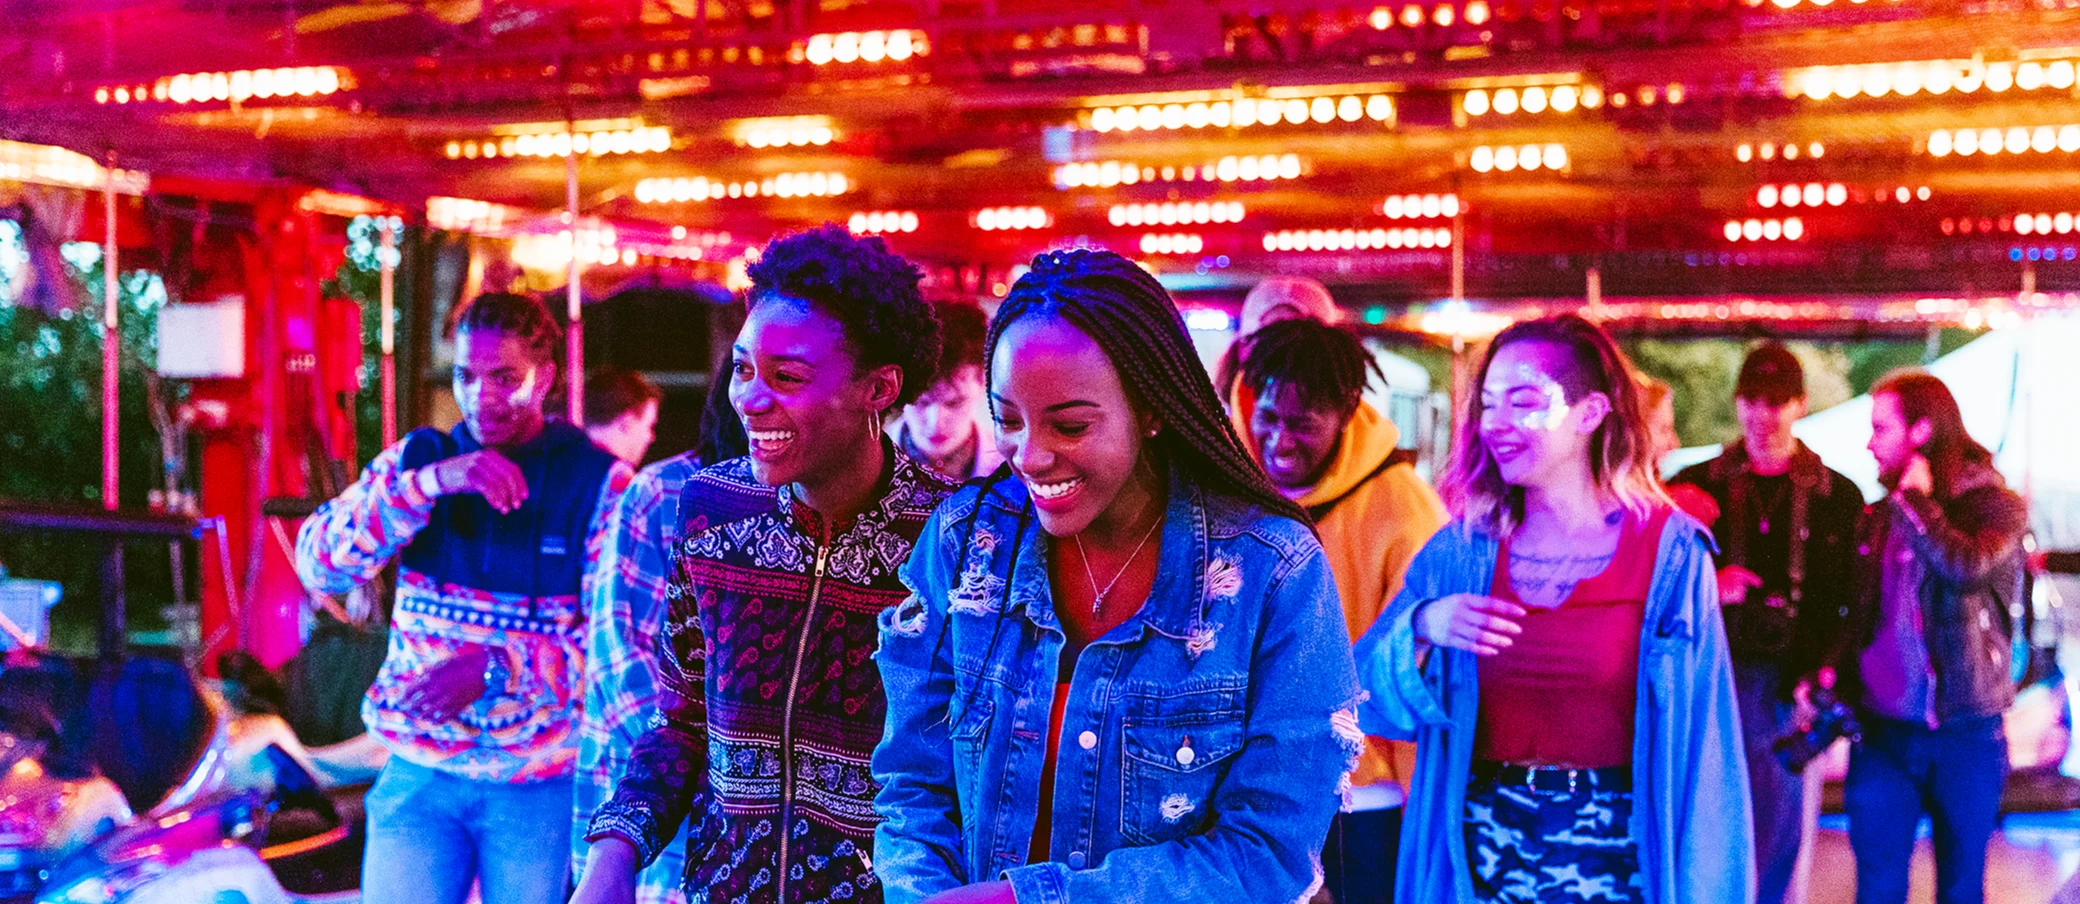 A group of young people enjoying a day out together at a fun fair